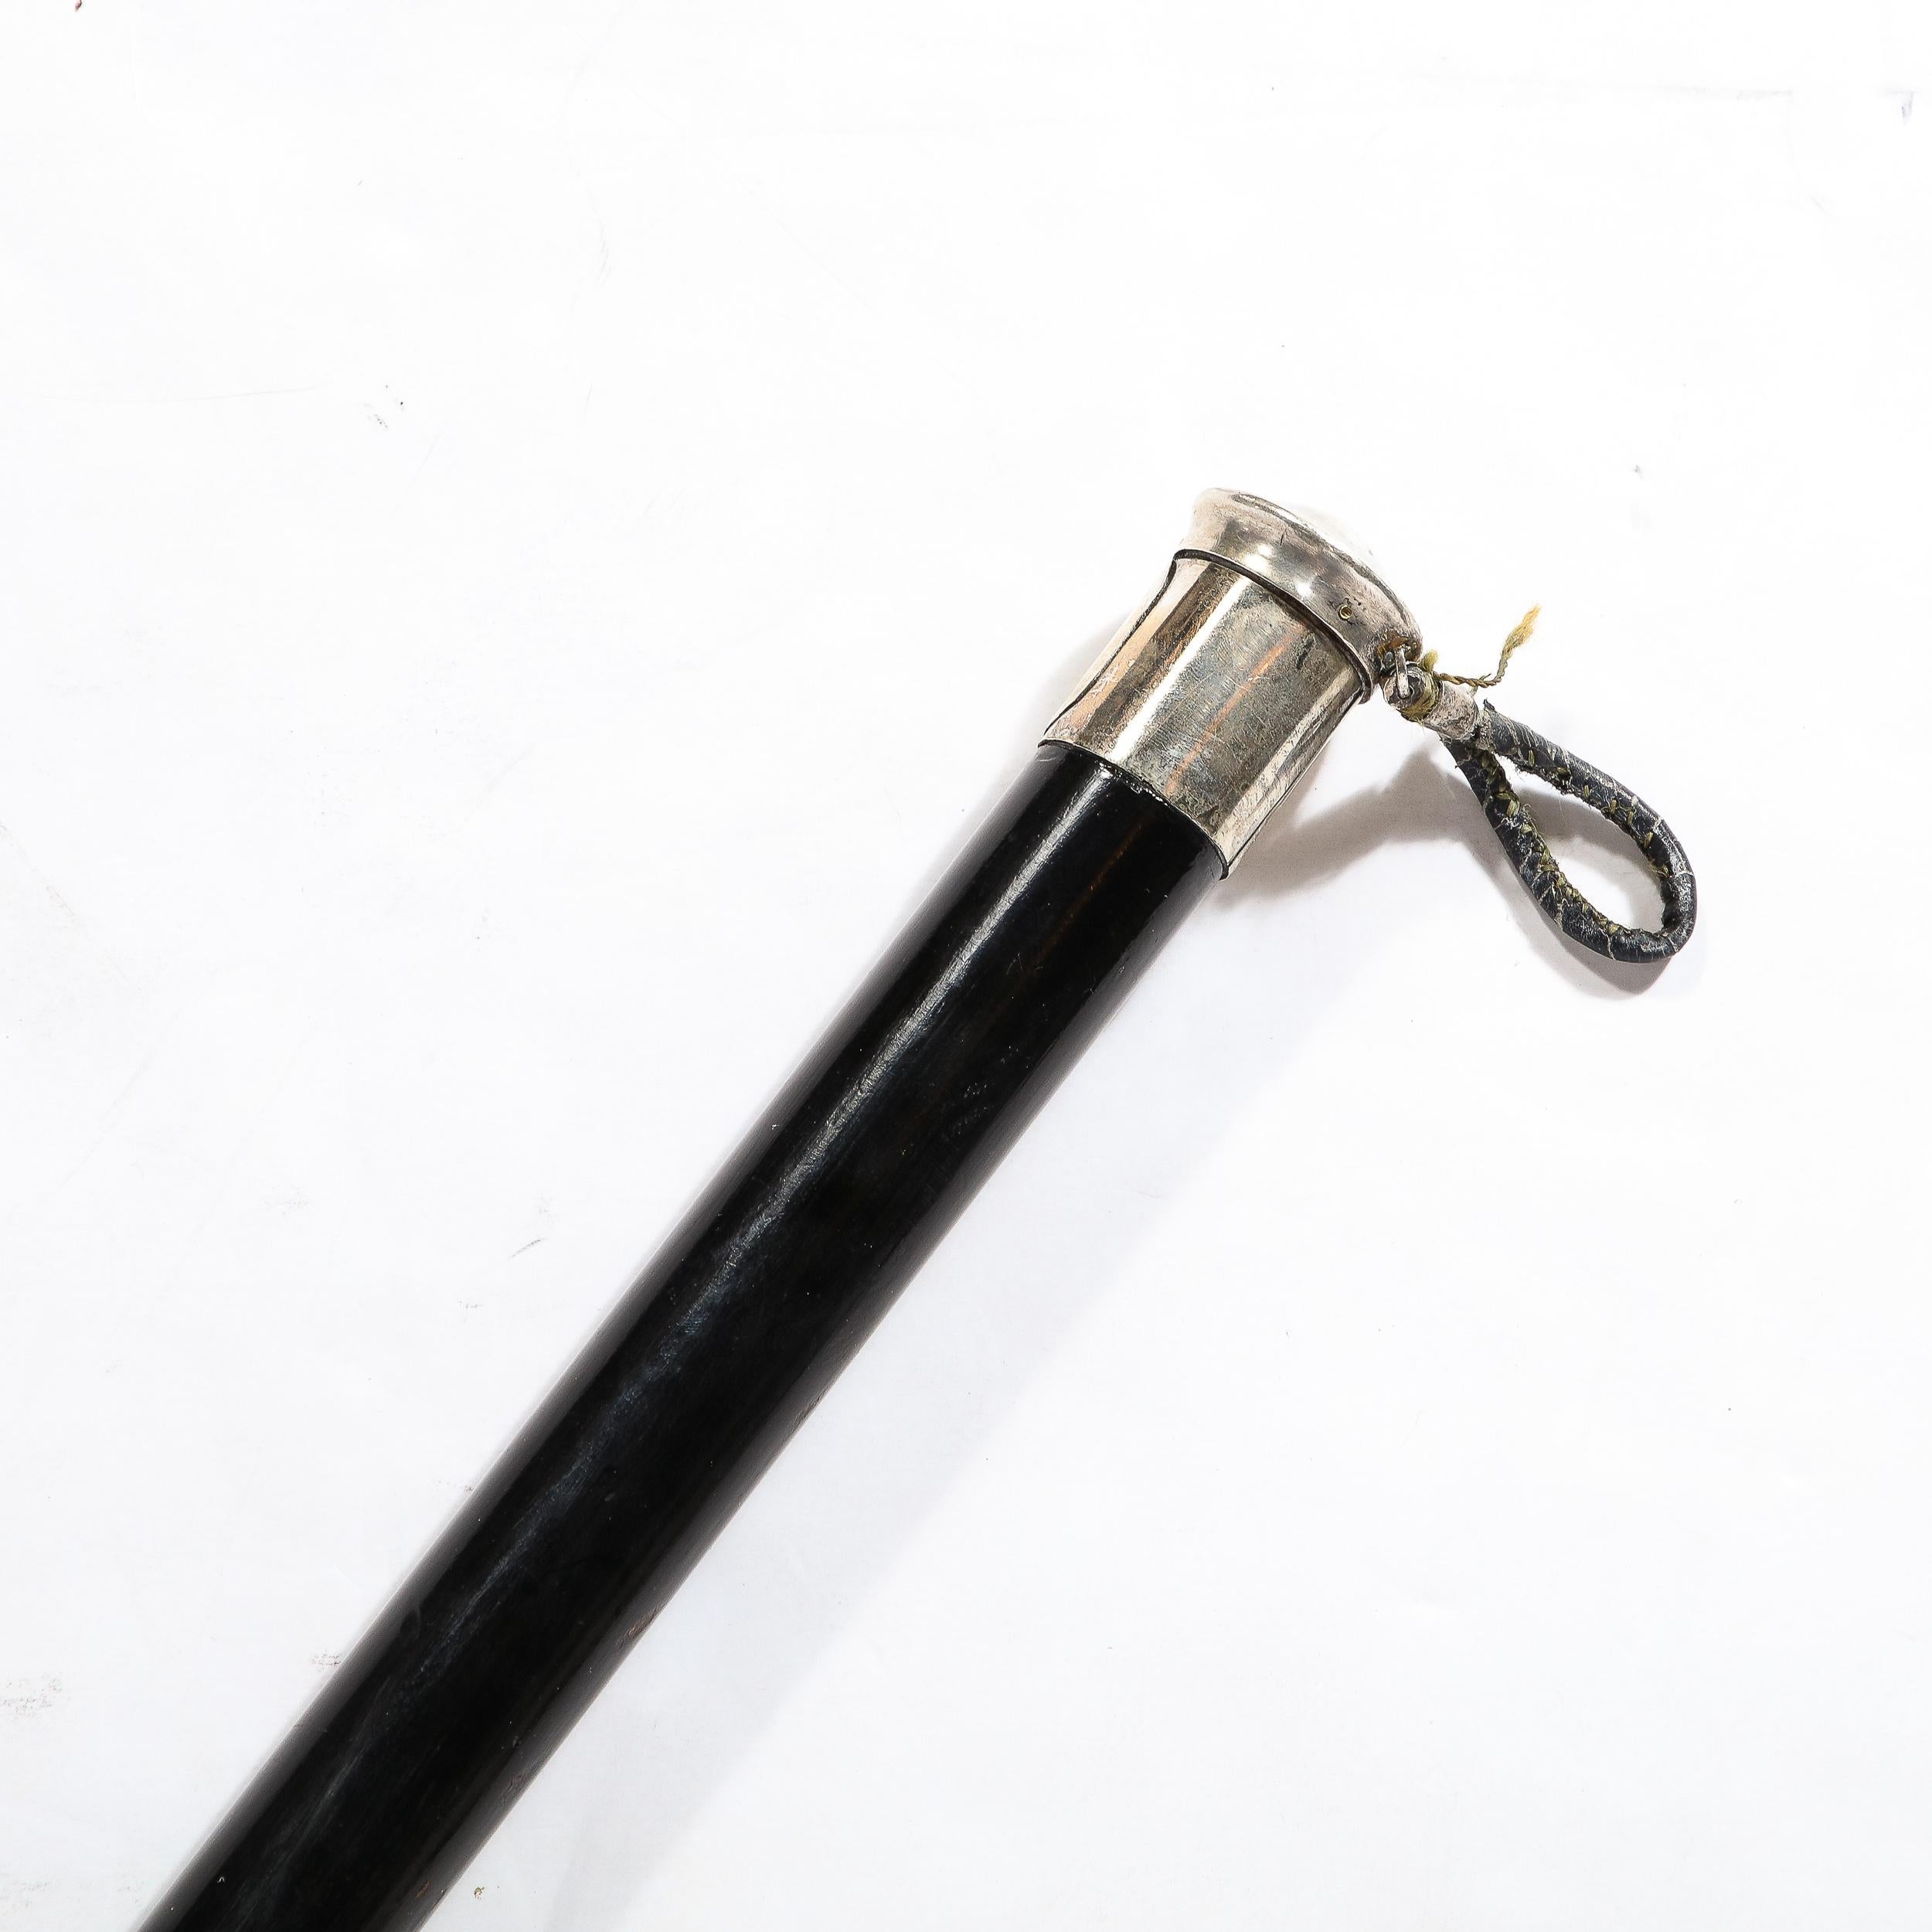 This Classical Walking Stick in Ebonized Walnut & Sterling Pommel W/ Heraldic Crest originates from France during the Late 19th Century. Features a elegant and timeless profile with a lovely pommel in sterling silver. The pommel is formed by a